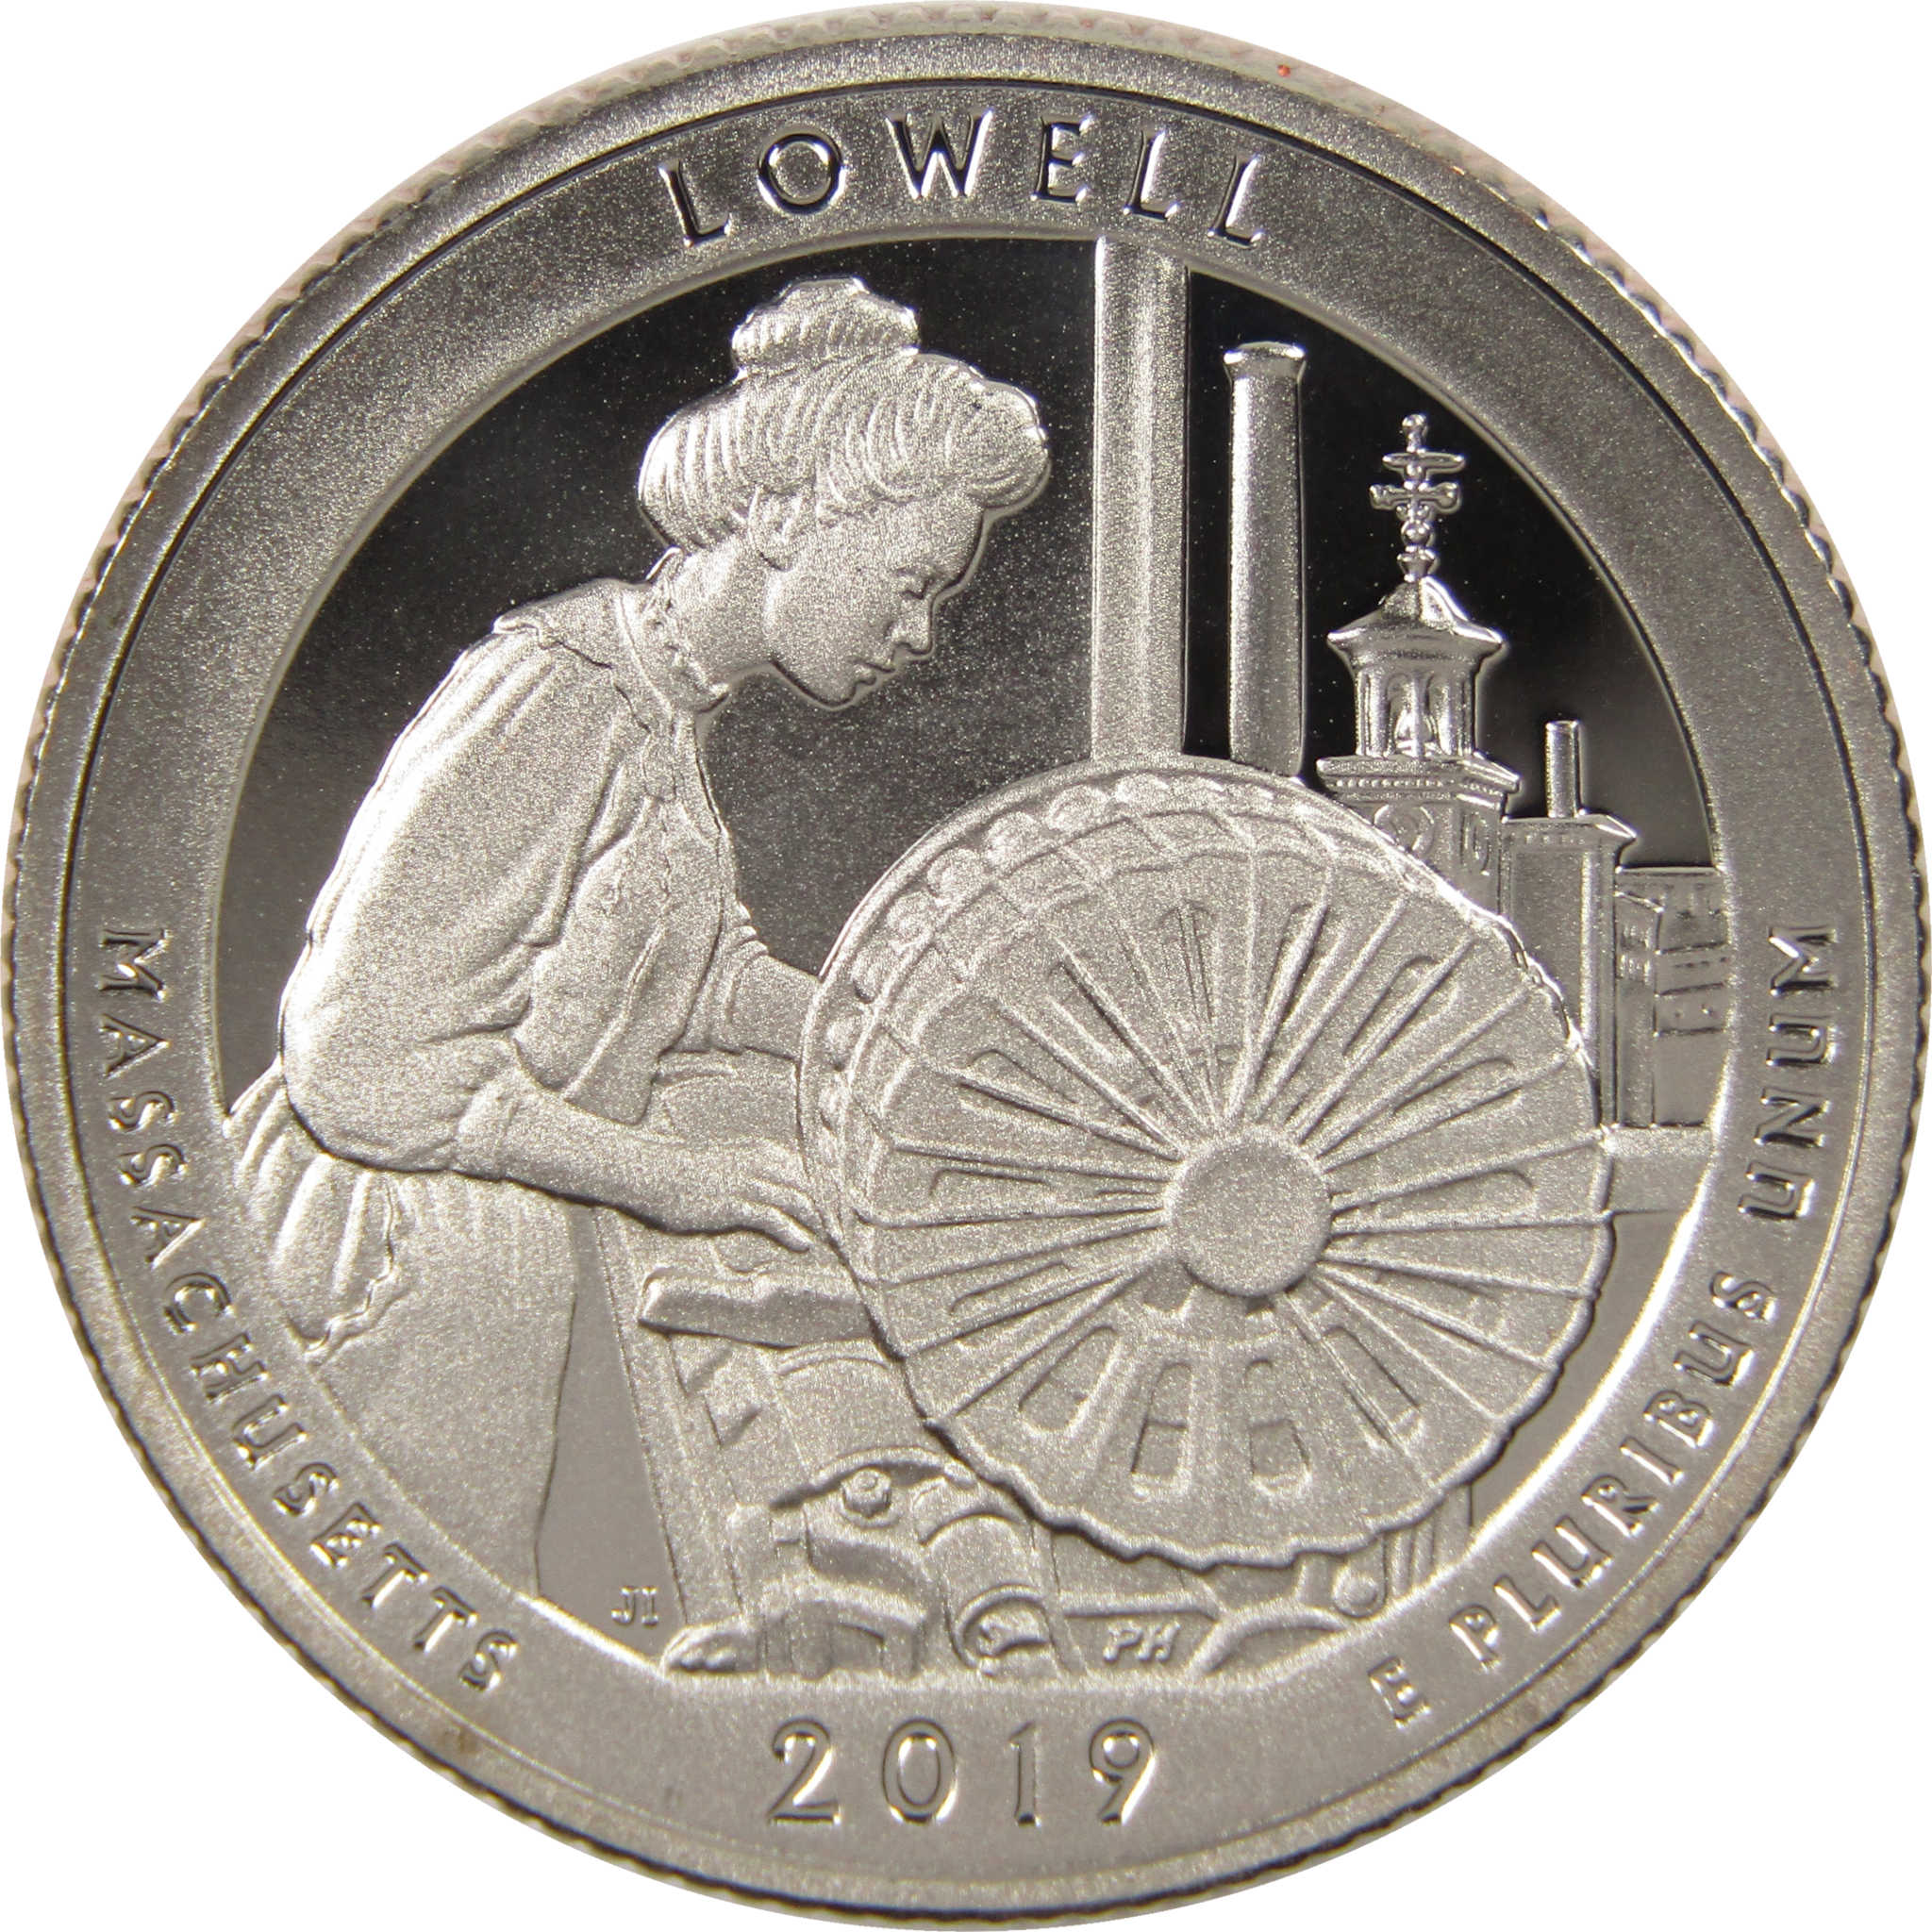 2019 S Lowell NHP National Park Quarter Choice Proof Clad ATB 25c Coin